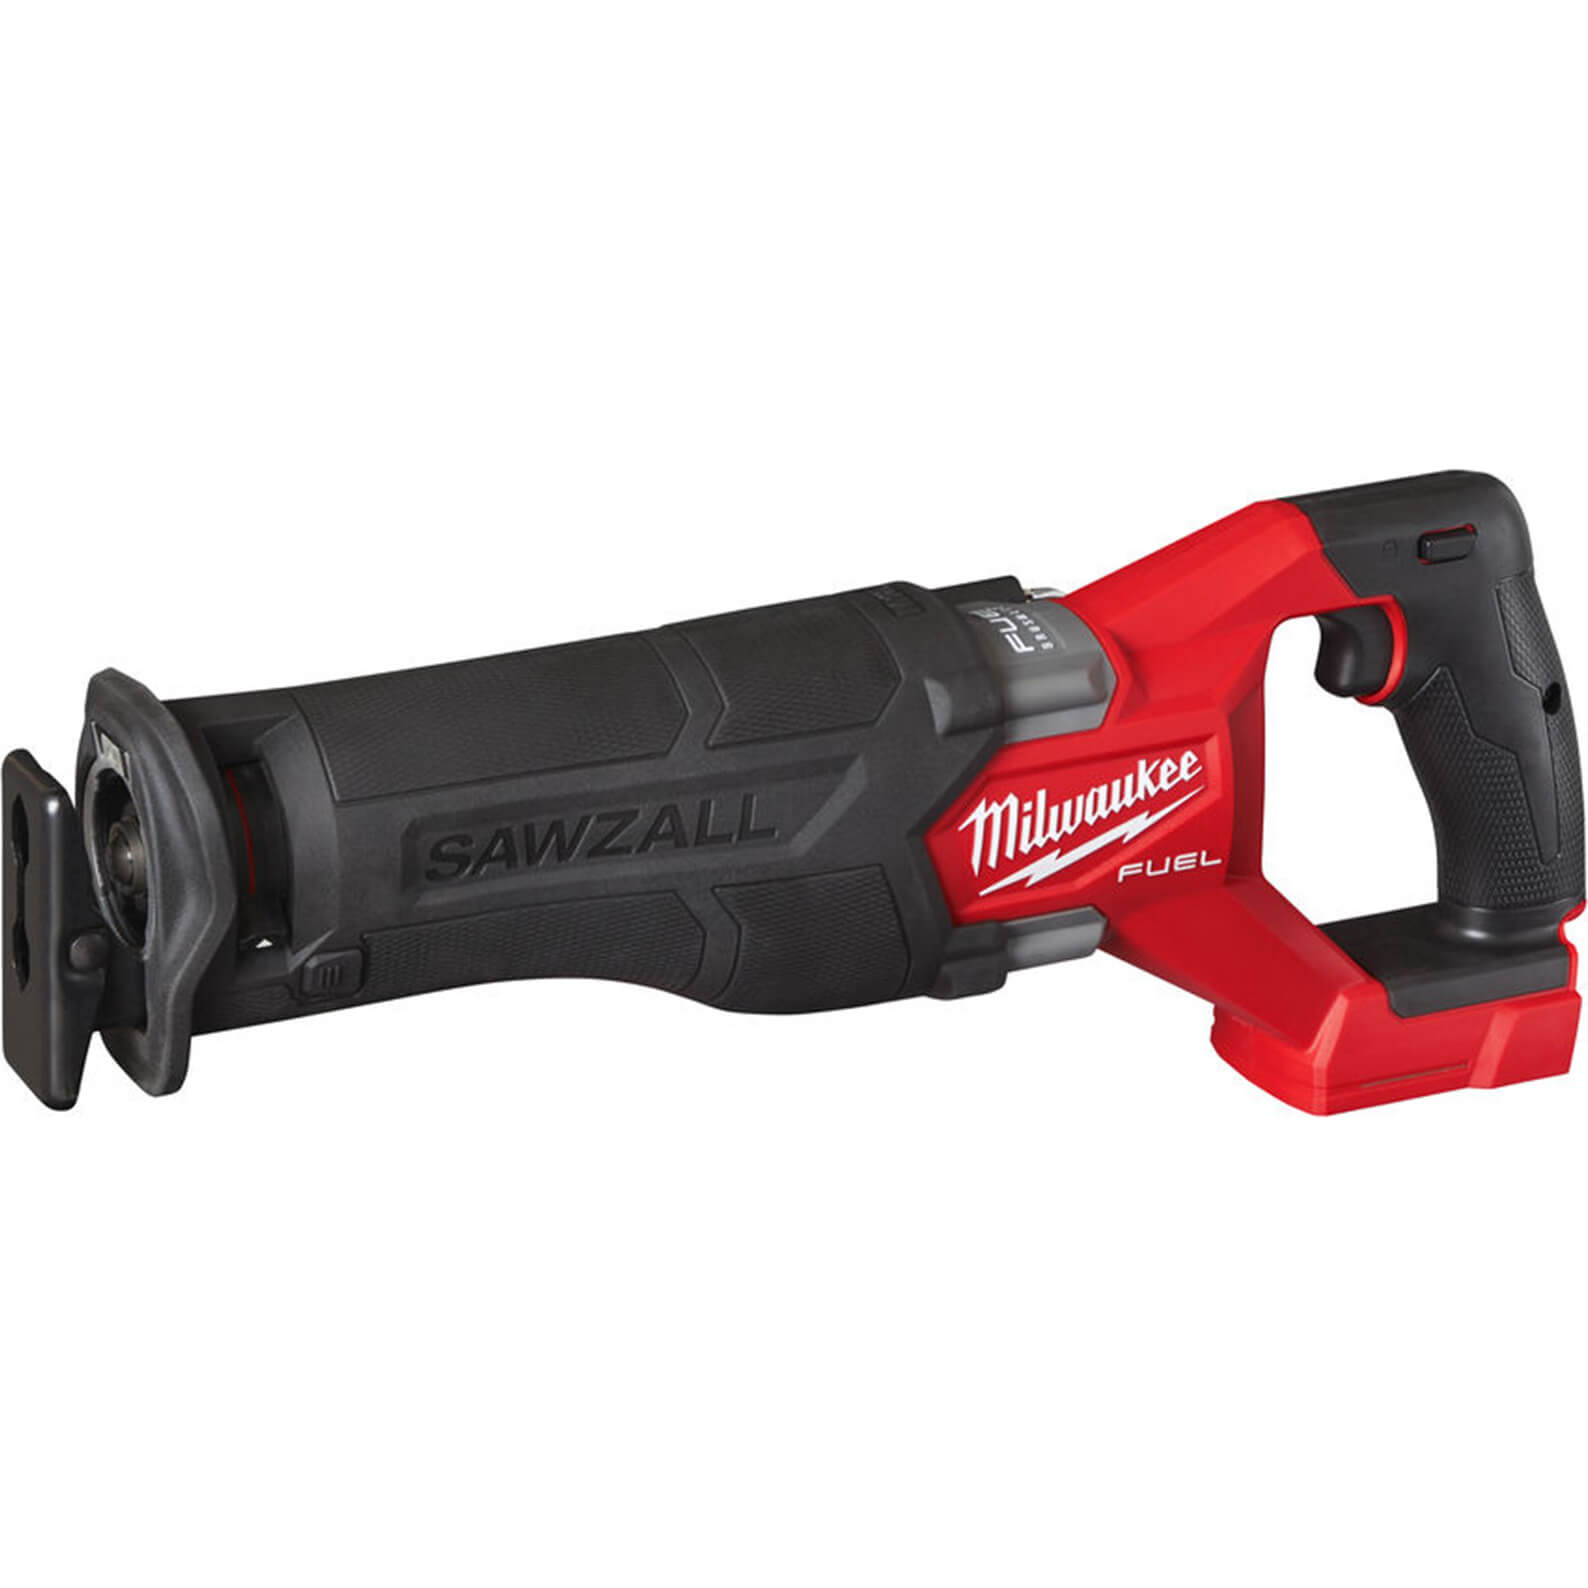 Milwaukee M18 FSZ Fuel 18v Cordless Brushless Sawzall Reciprocating Saw No Batteries No Charger No Case